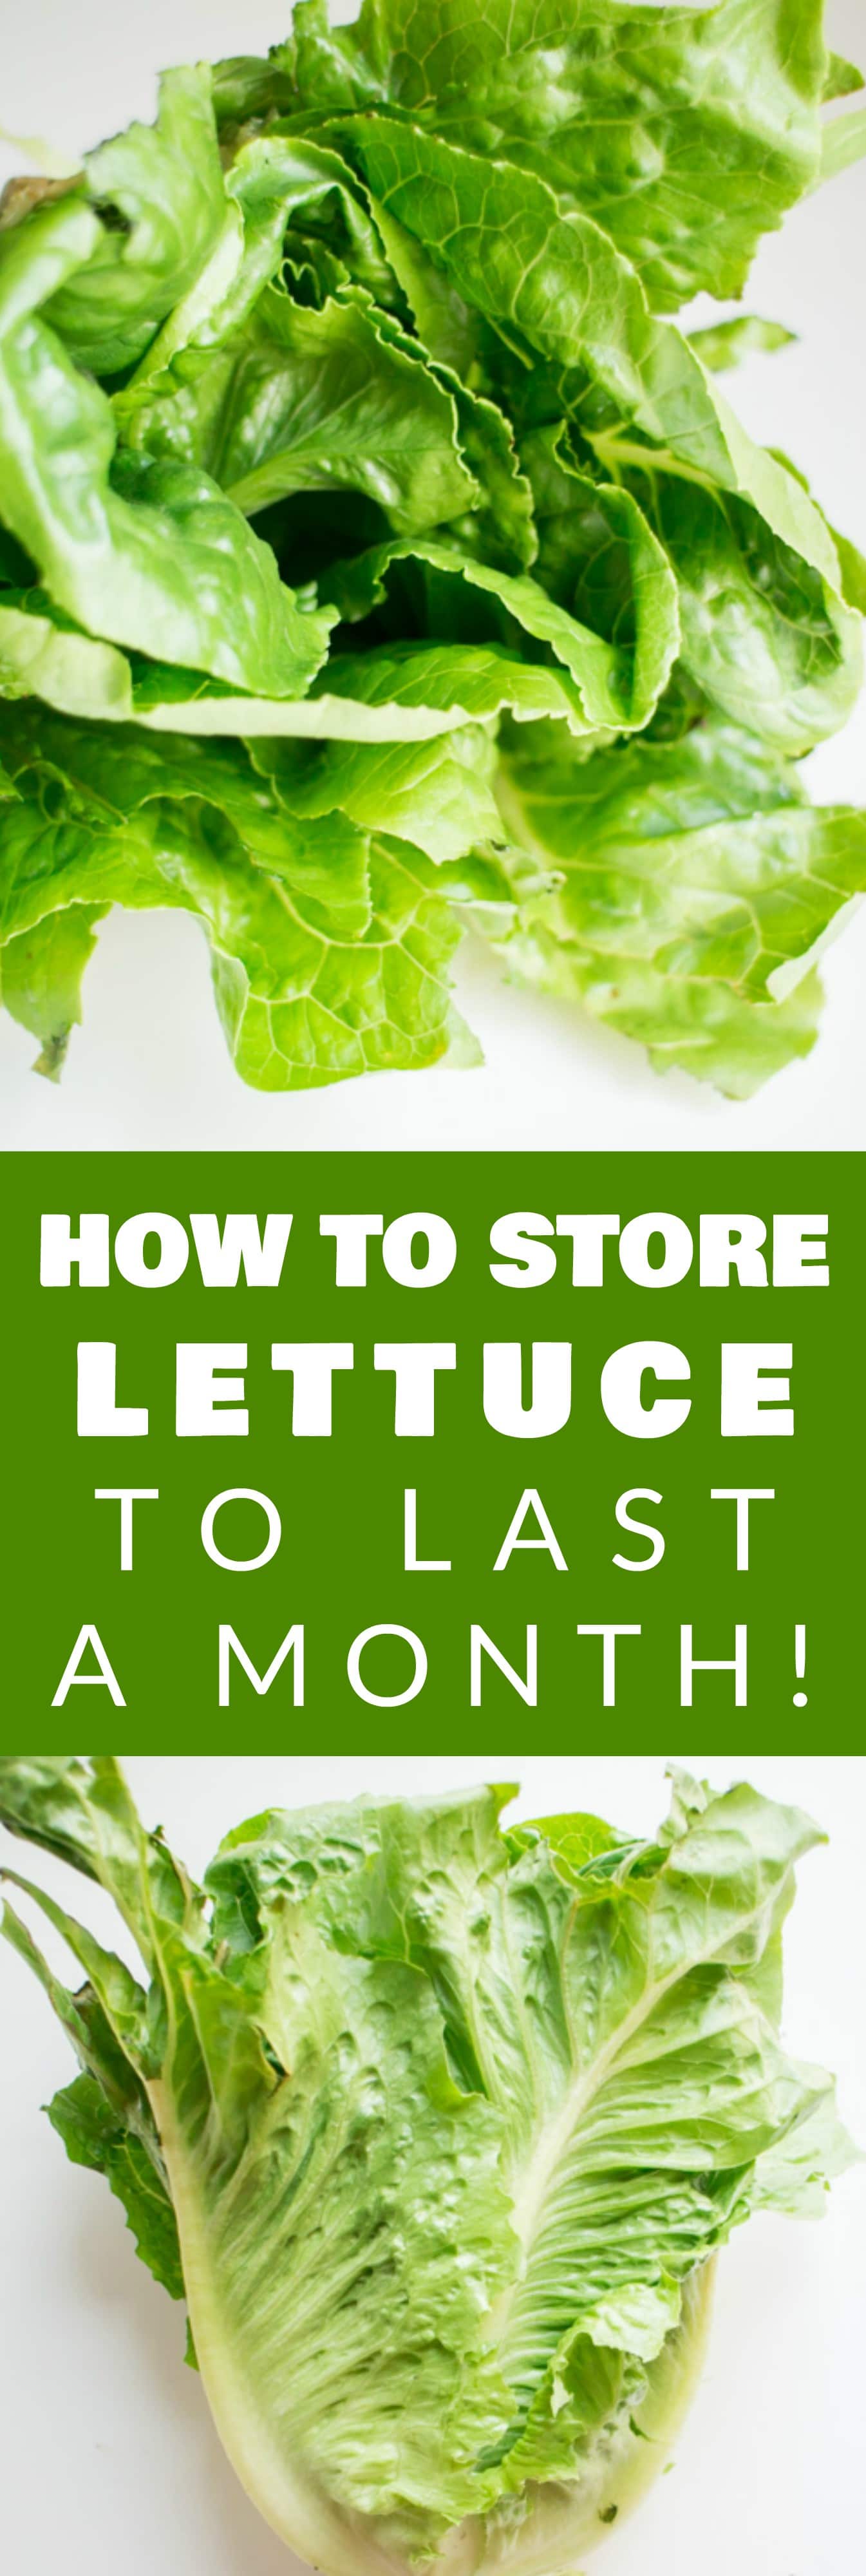 How to Store Lettuce to Last for a Month - Brooklyn Farm Girl